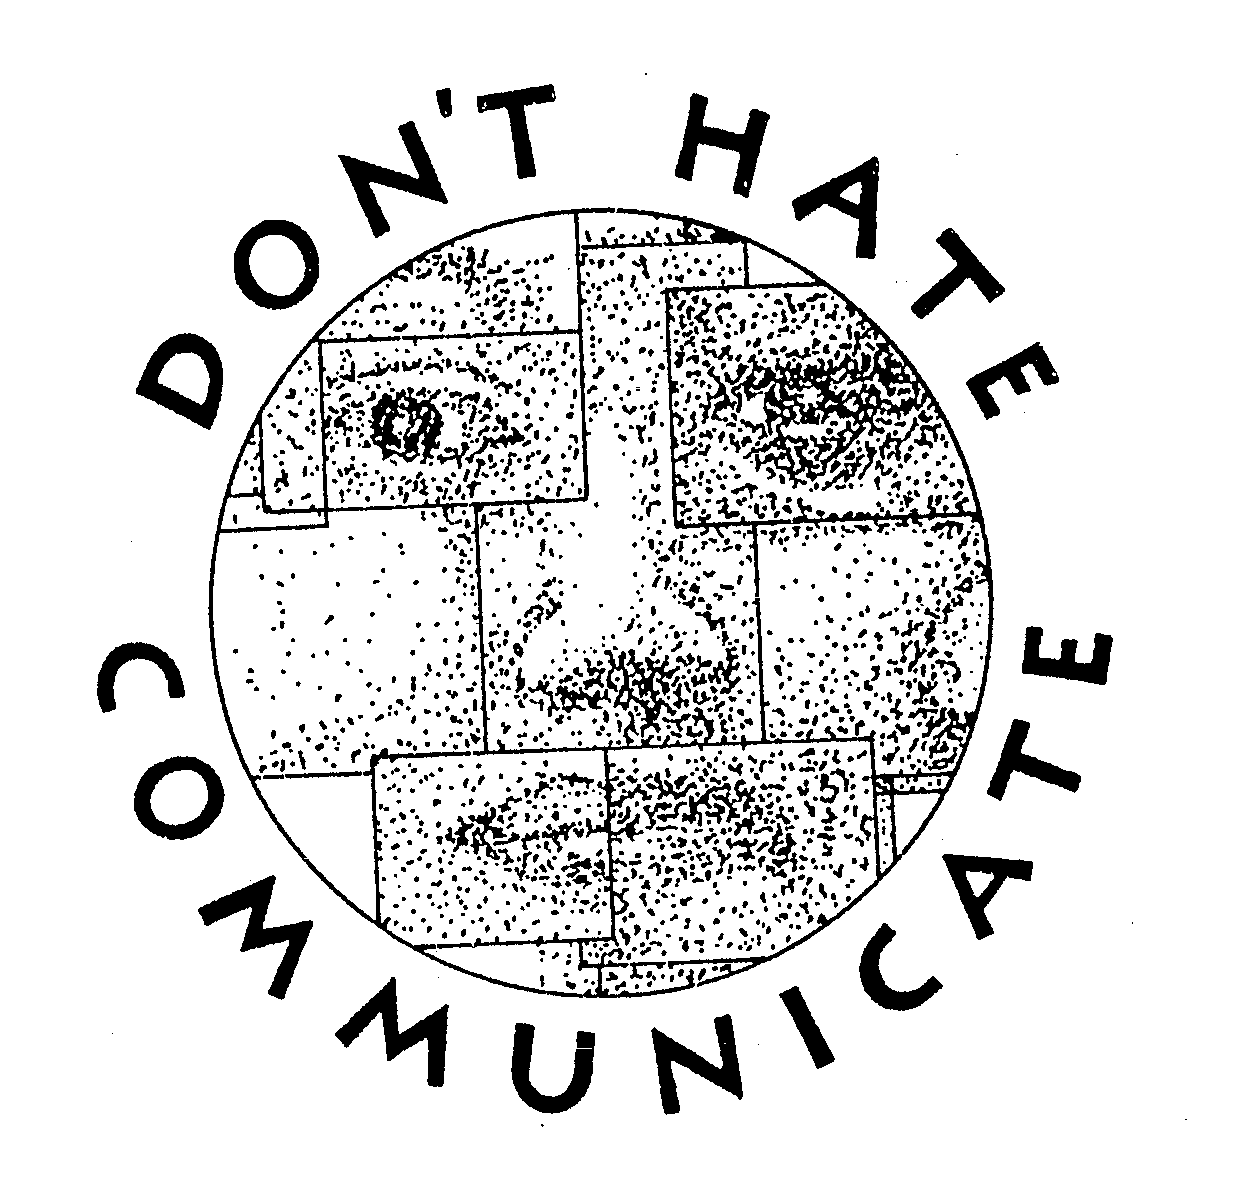  DON'T HATE COMMUNICATE